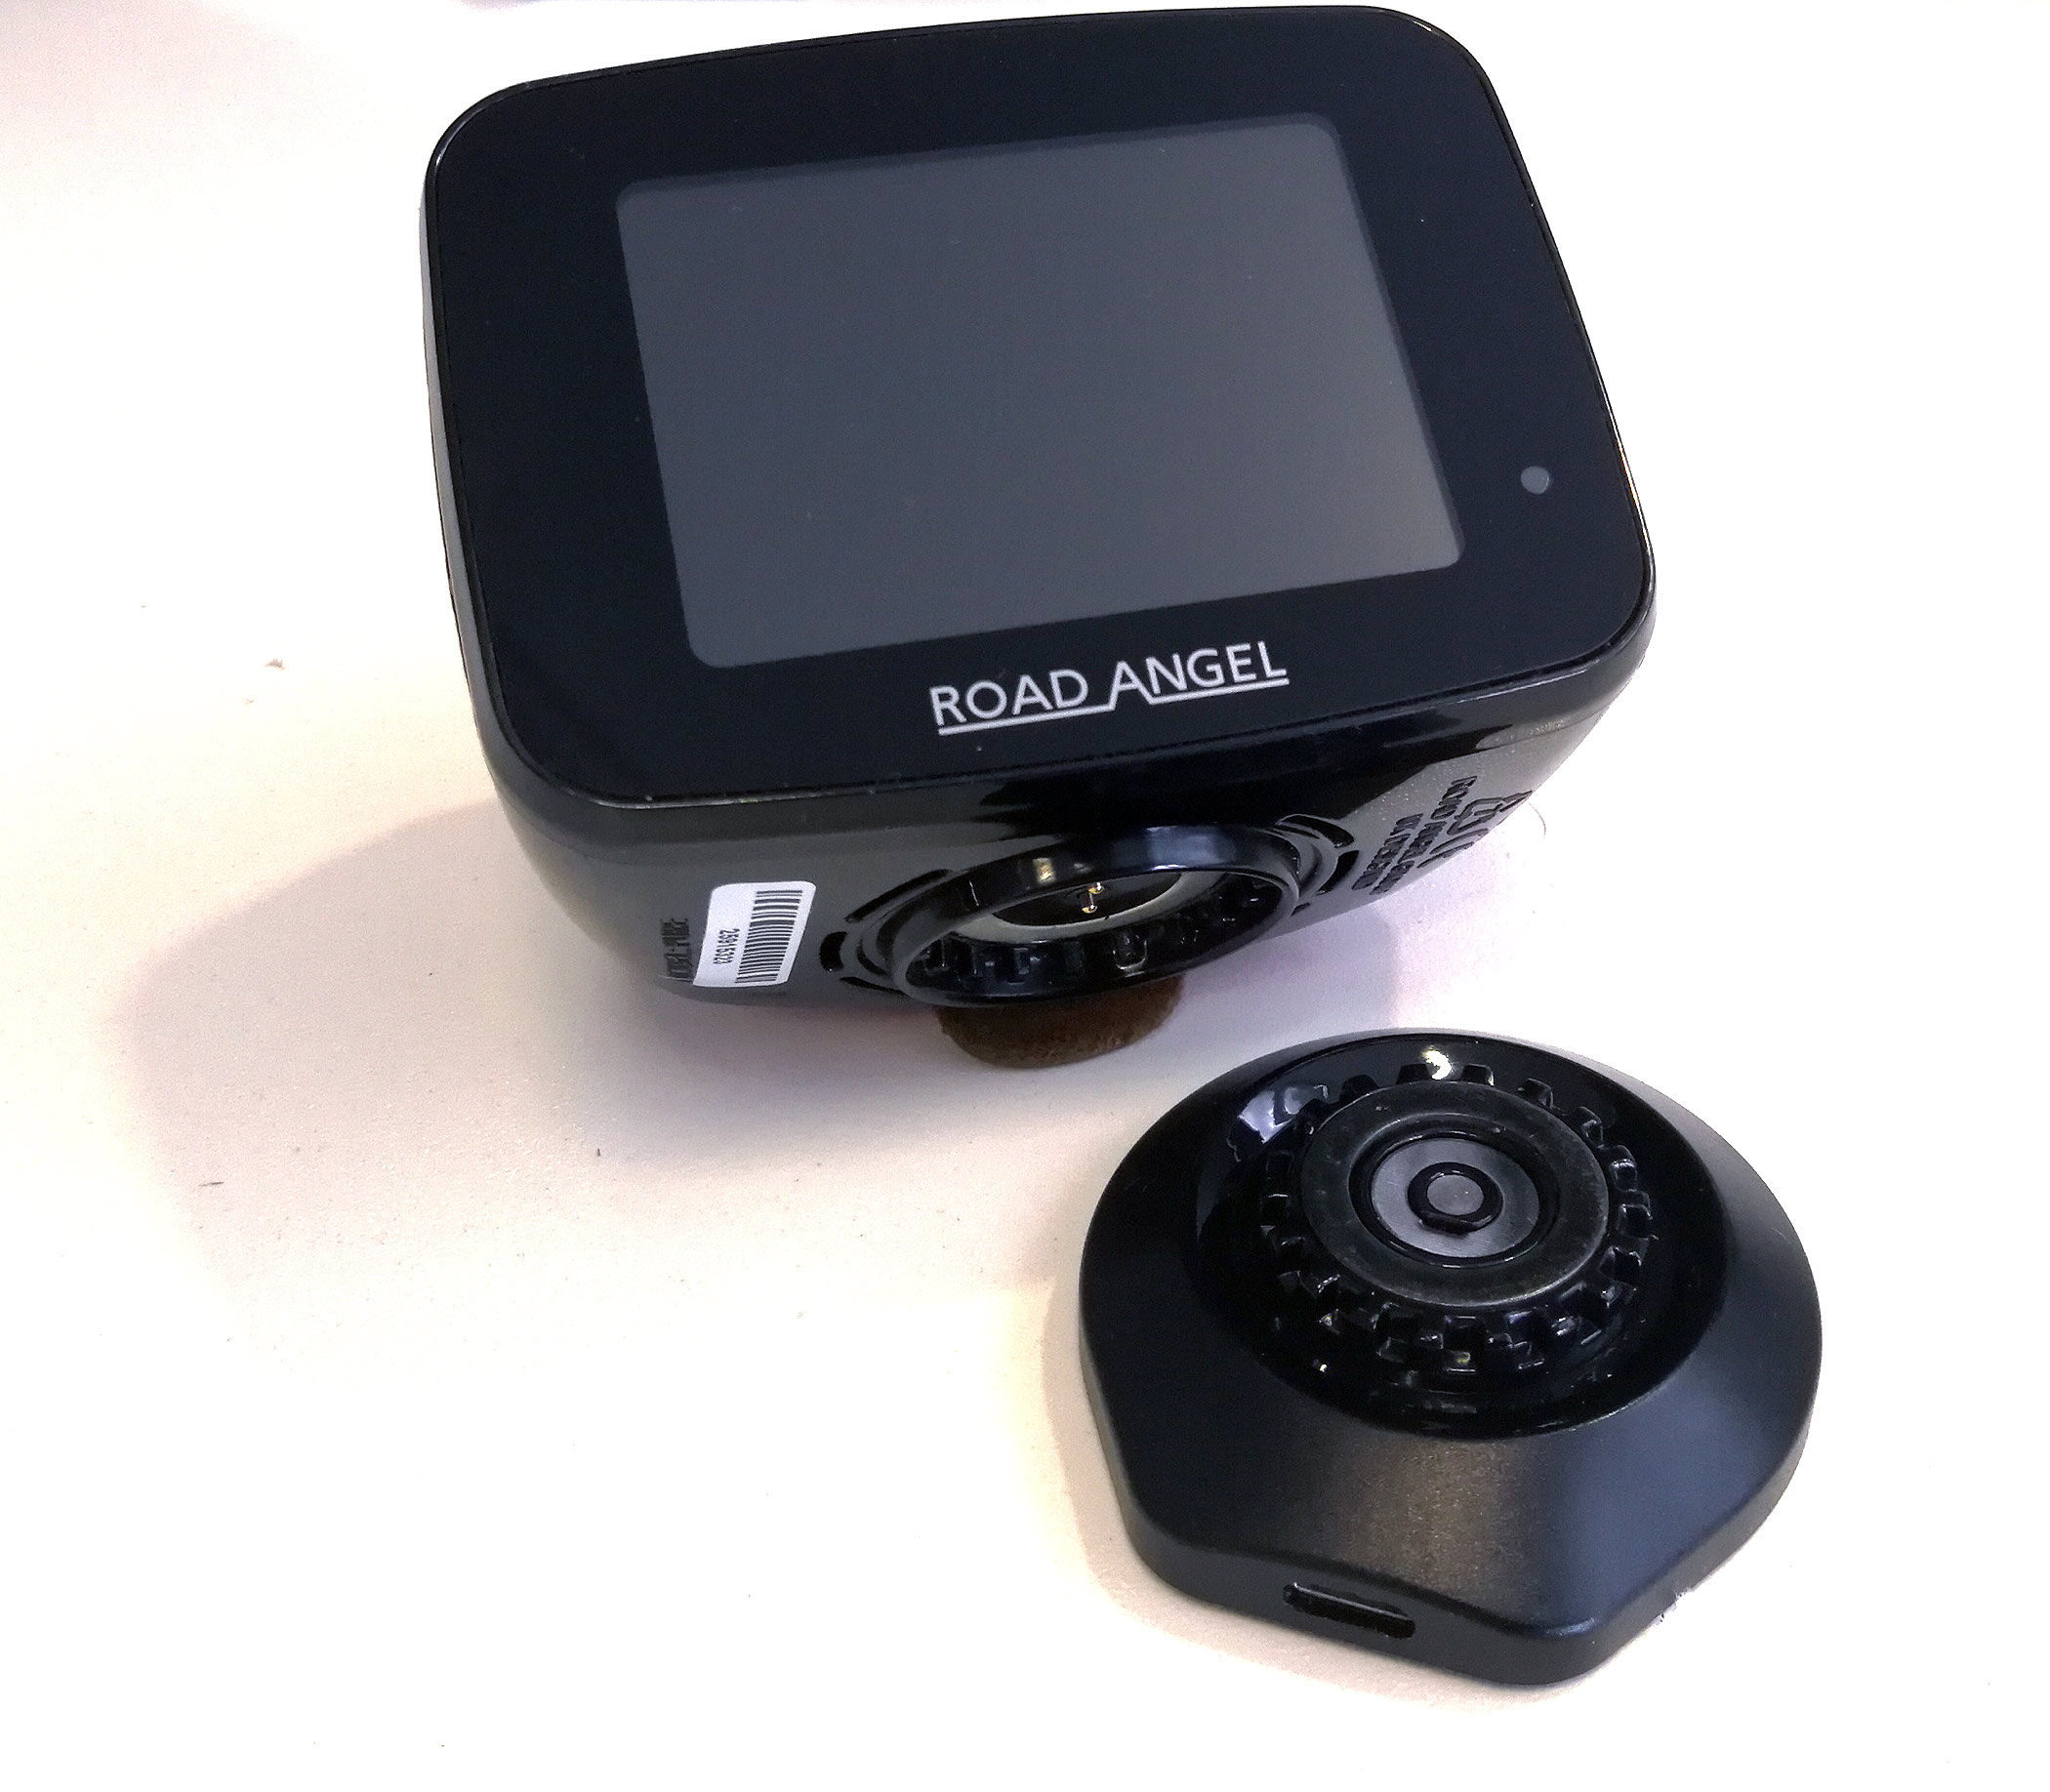 Road Angel Pure speed camera and laser detector review